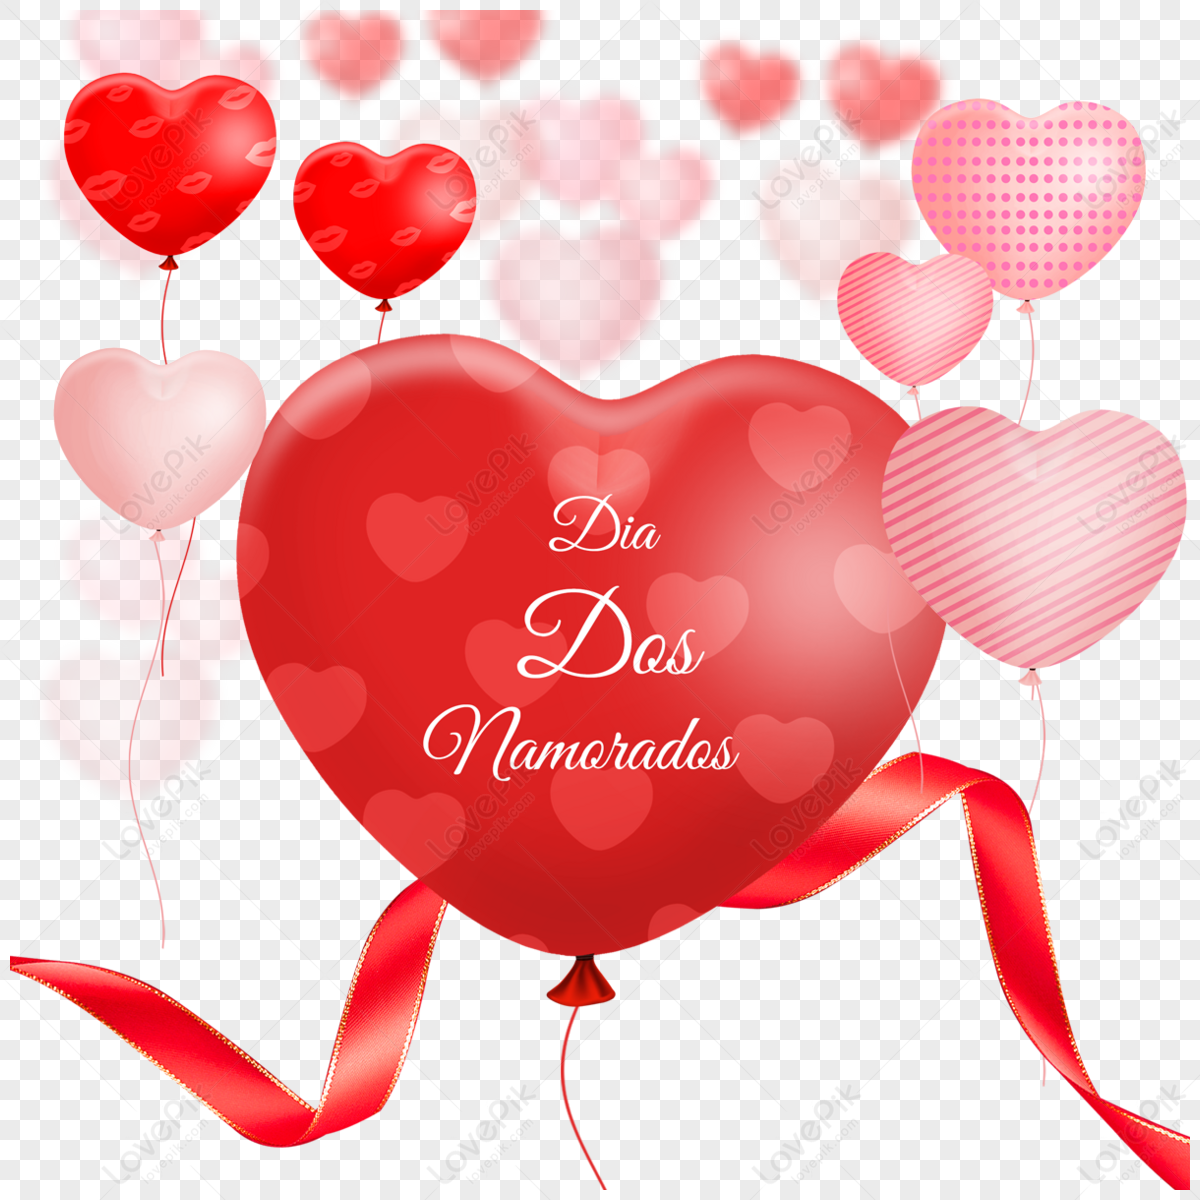 Red brazilian valentines day poster template image_picture free download  466358226_